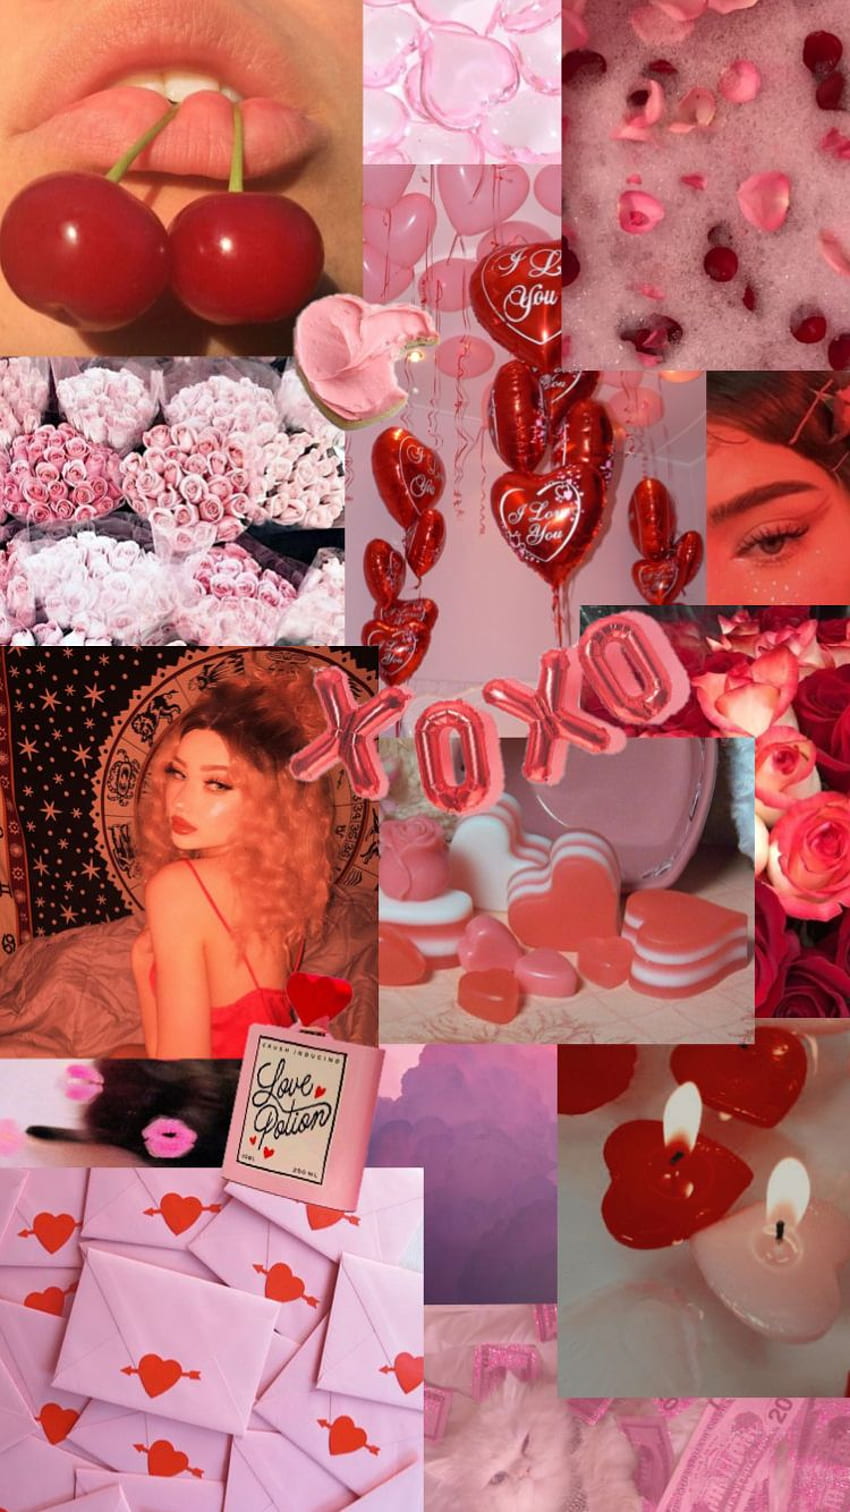 Aesthetic wallpaper for phone background, pink and red, Valentine's Day - Valentine's Day